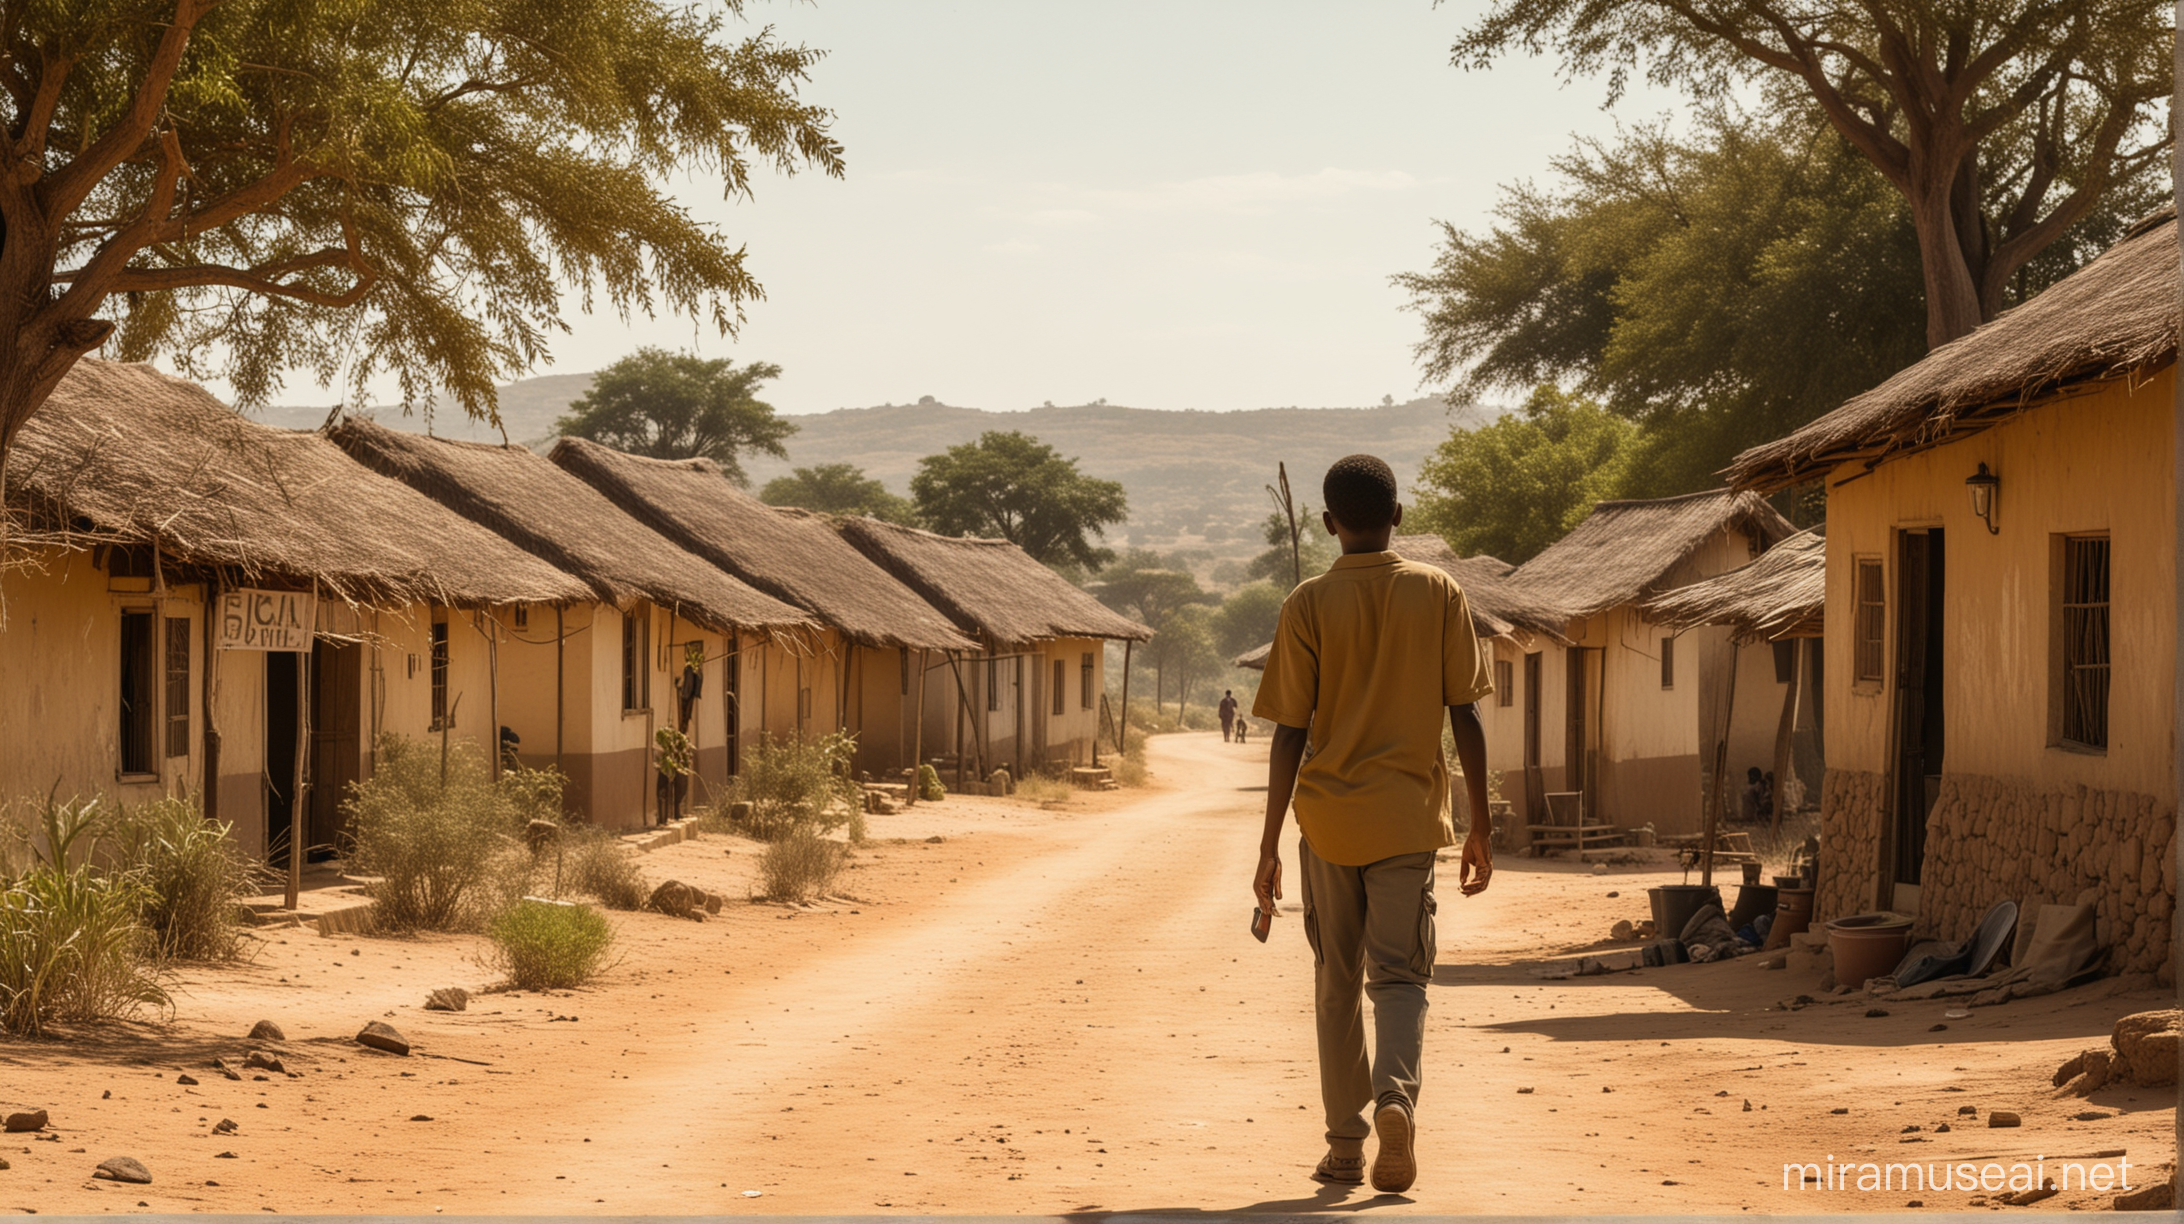 Set in the sun-drenched village of Mbala, a tranquil West African setting with golden plains and a bustling village atmosphere. The protagonist, Malik, the African school boy walking to school
